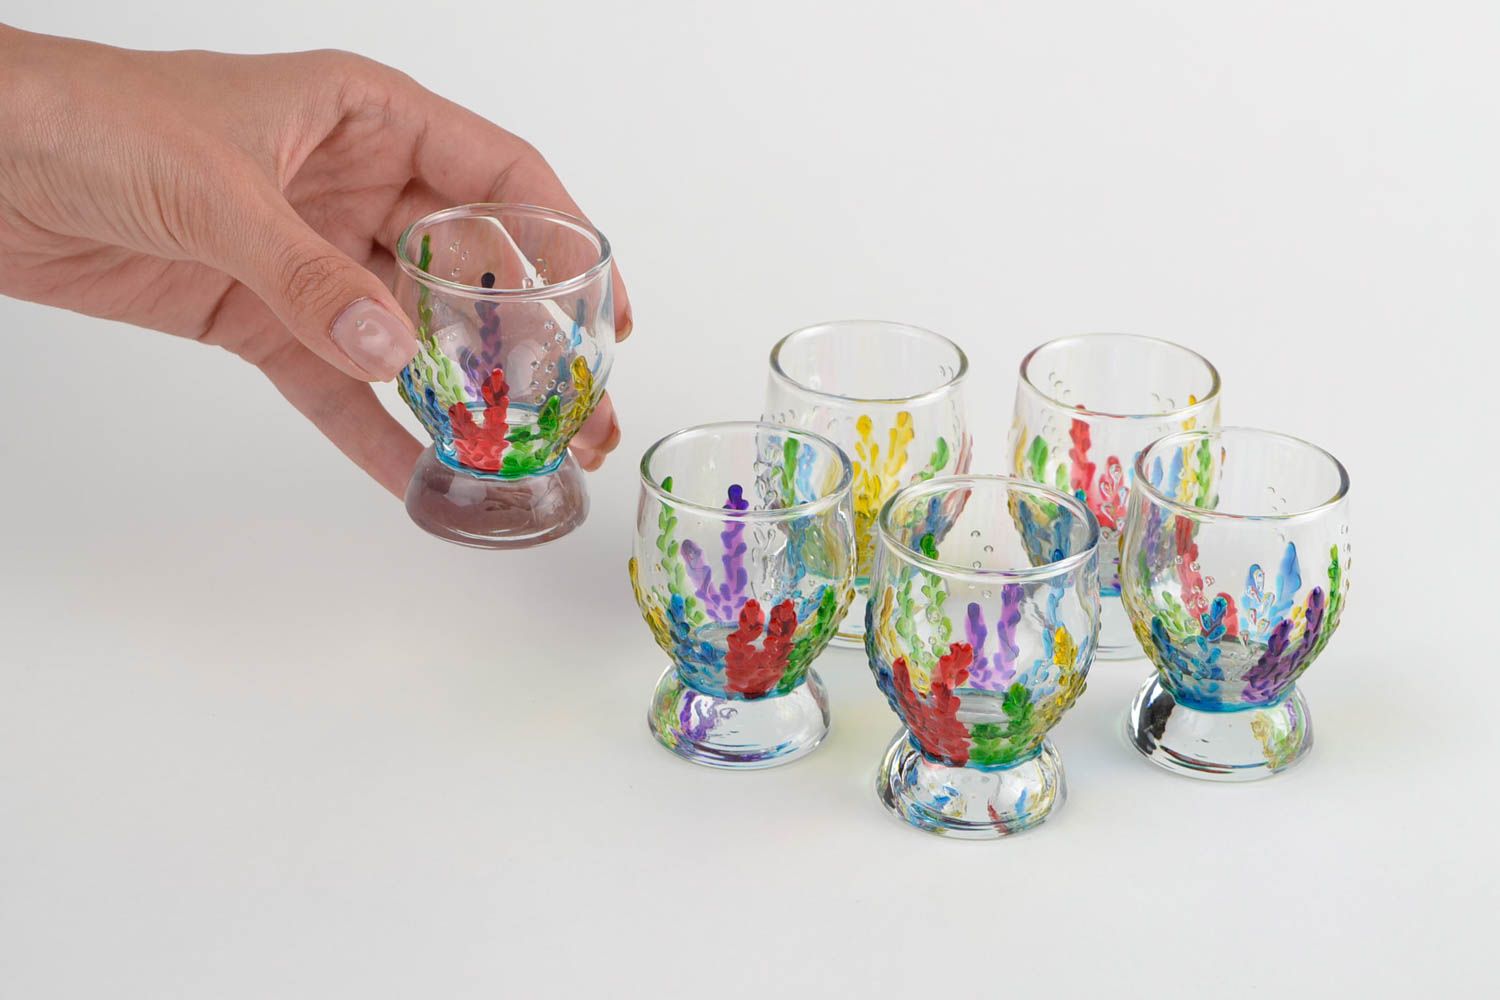 Unusual handmade shot glass shot glasses set 6 pieces painted glass gift ideas photo 2